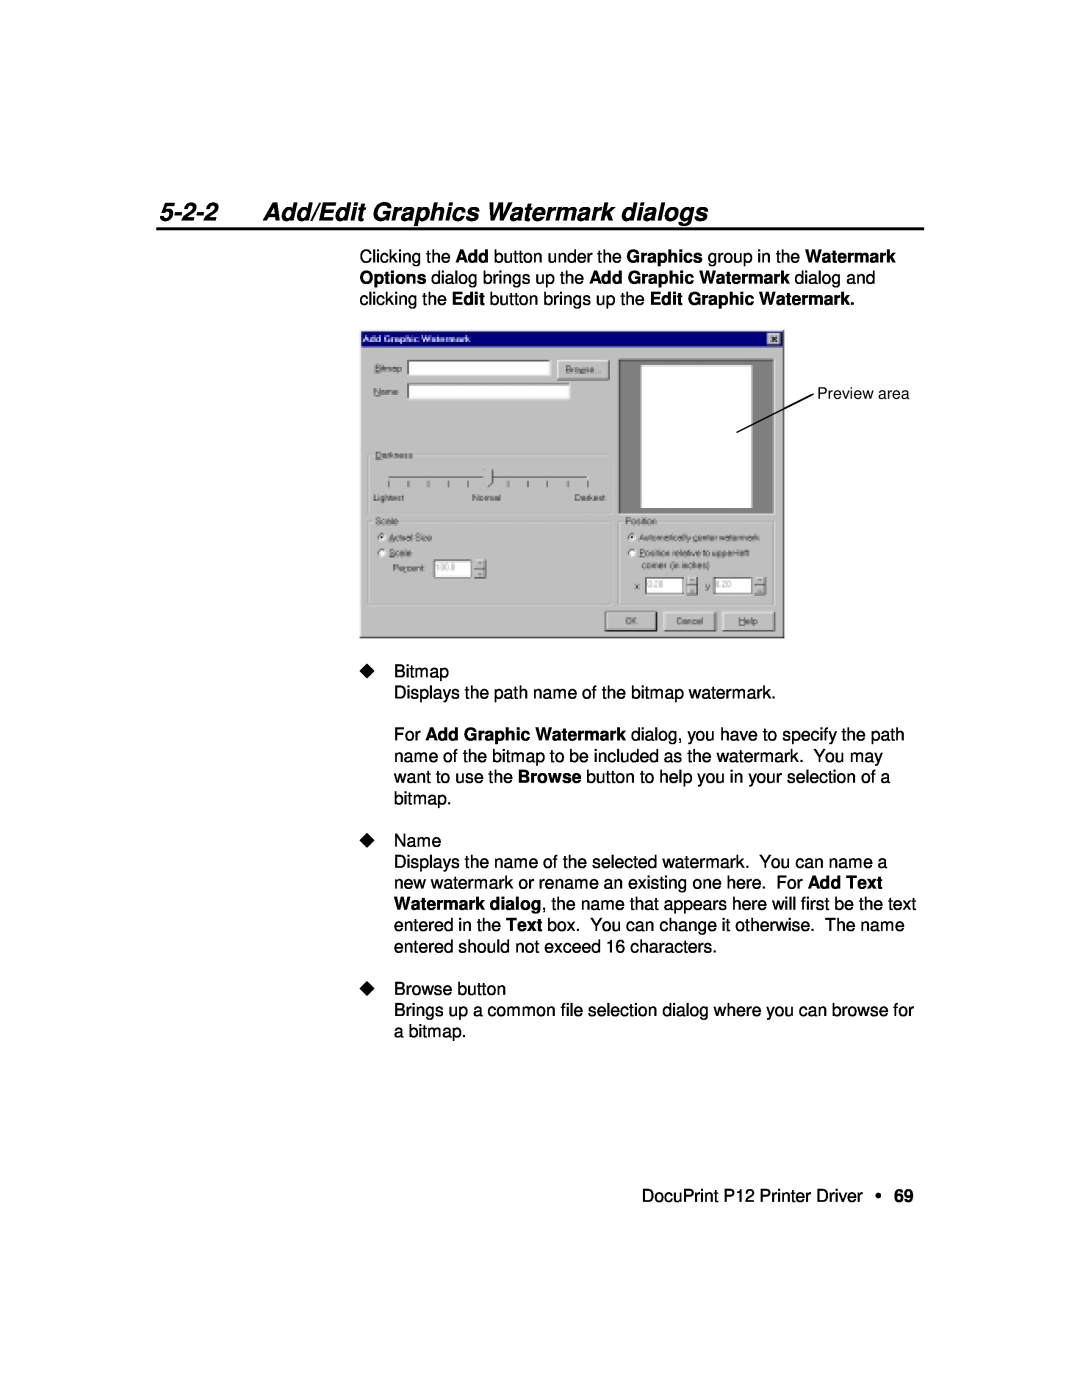 Xerox P12 manual 5-2-2 Add/Edit Graphics Watermark dialogs, Preview area 